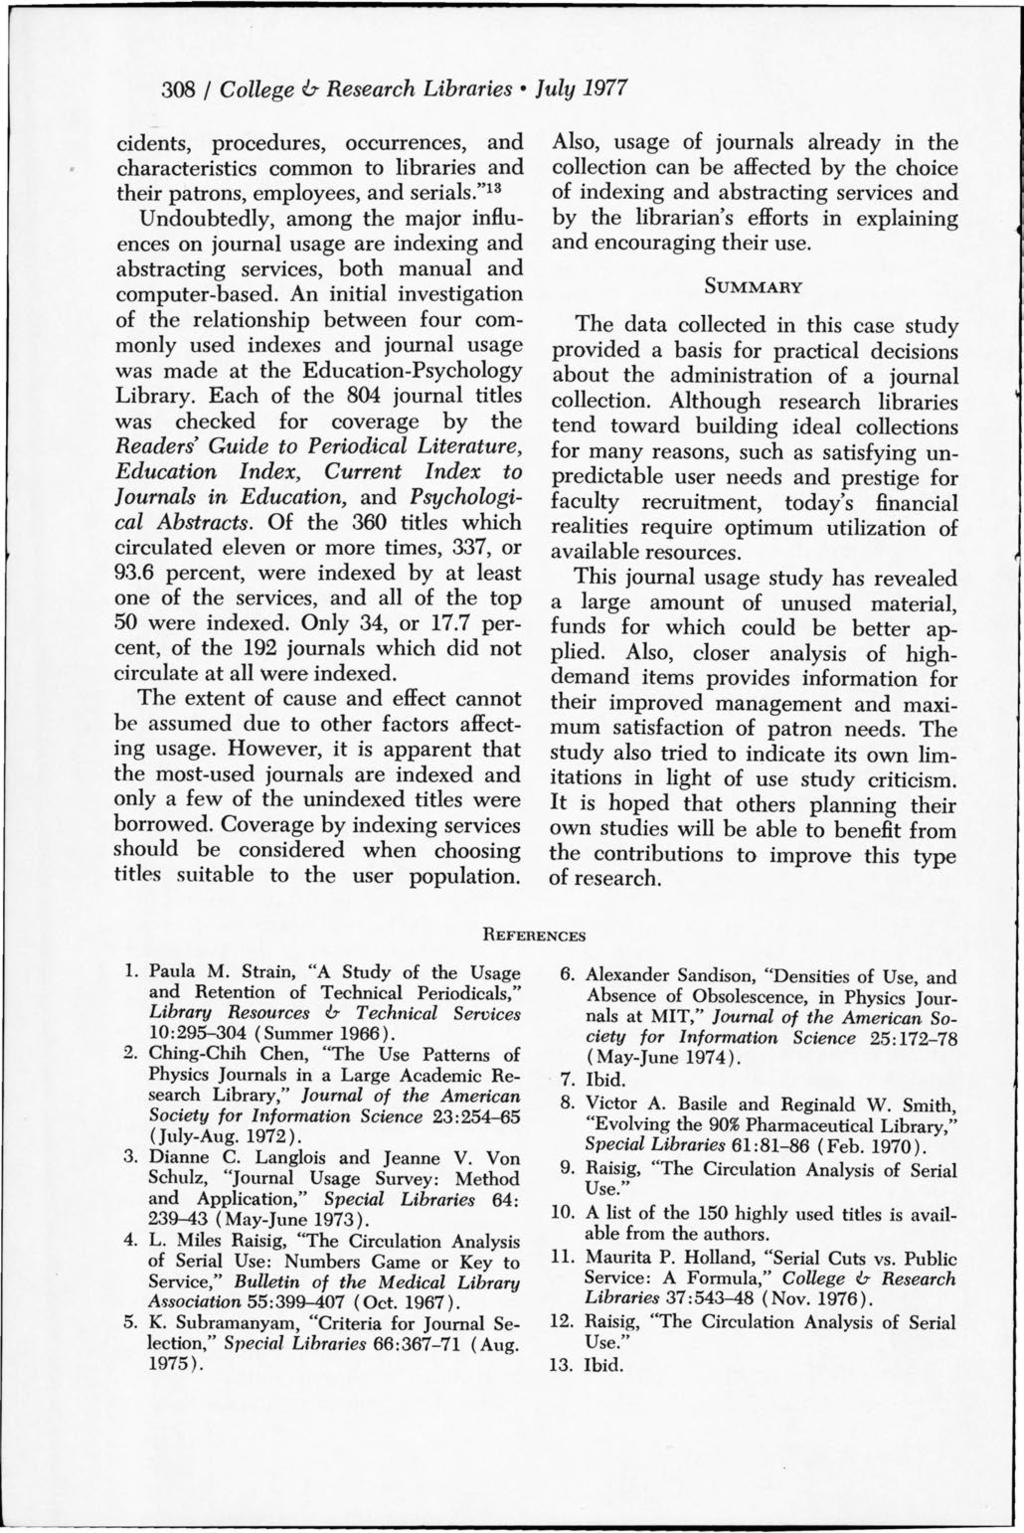 308 f College & Research Librar-ies July 1977 cidents, procedures, occurrences, and characteristics common to libraries and their patrons, employees, and serials.